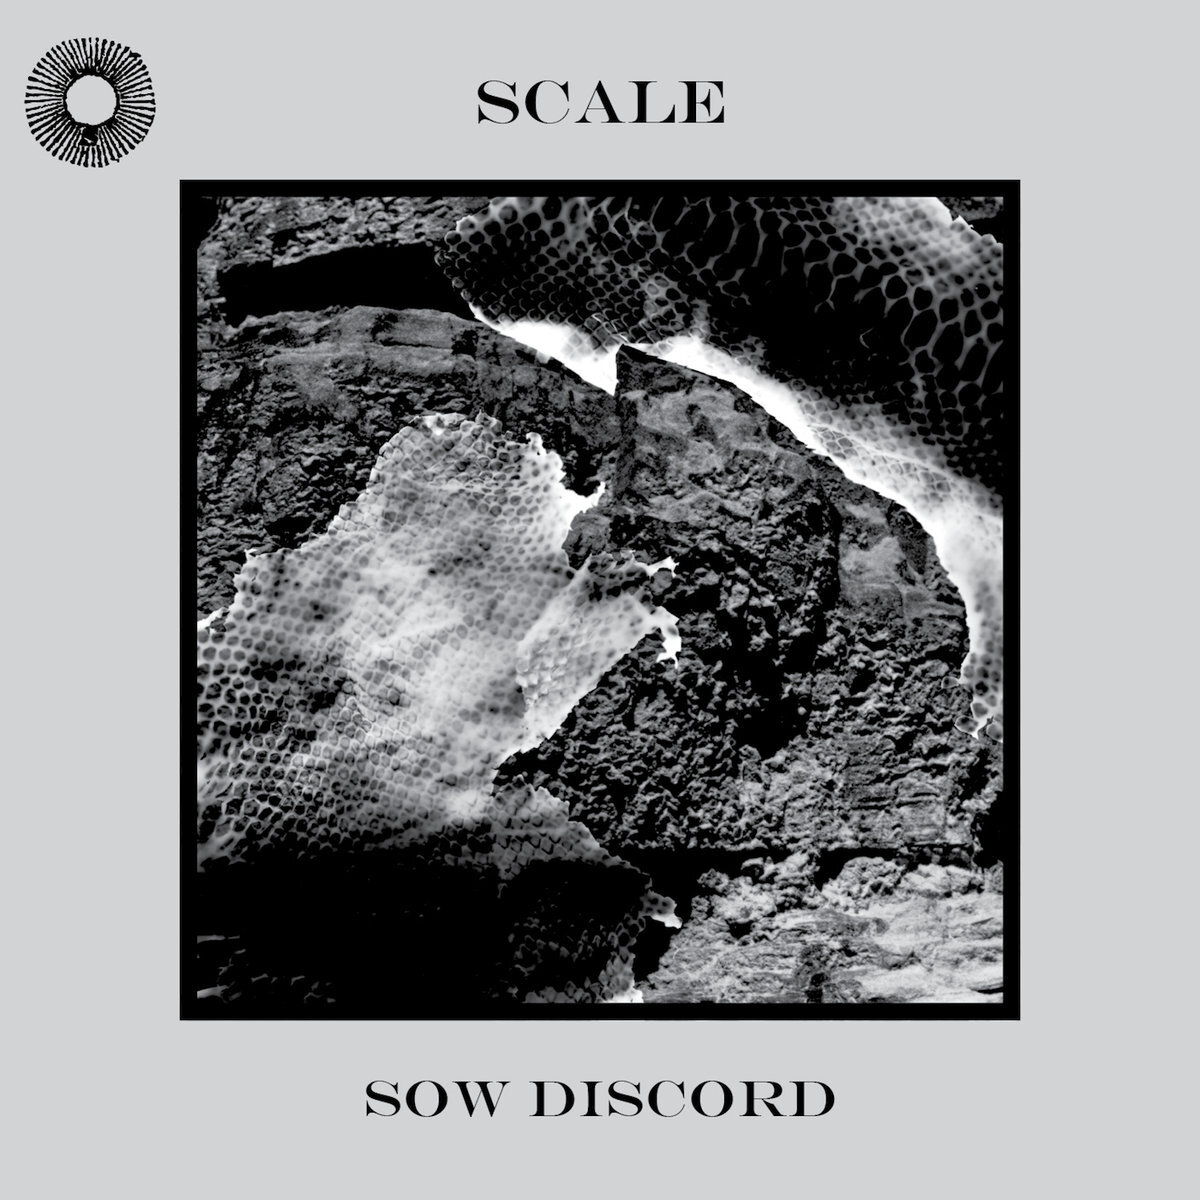 Scale - SOW DISCORD